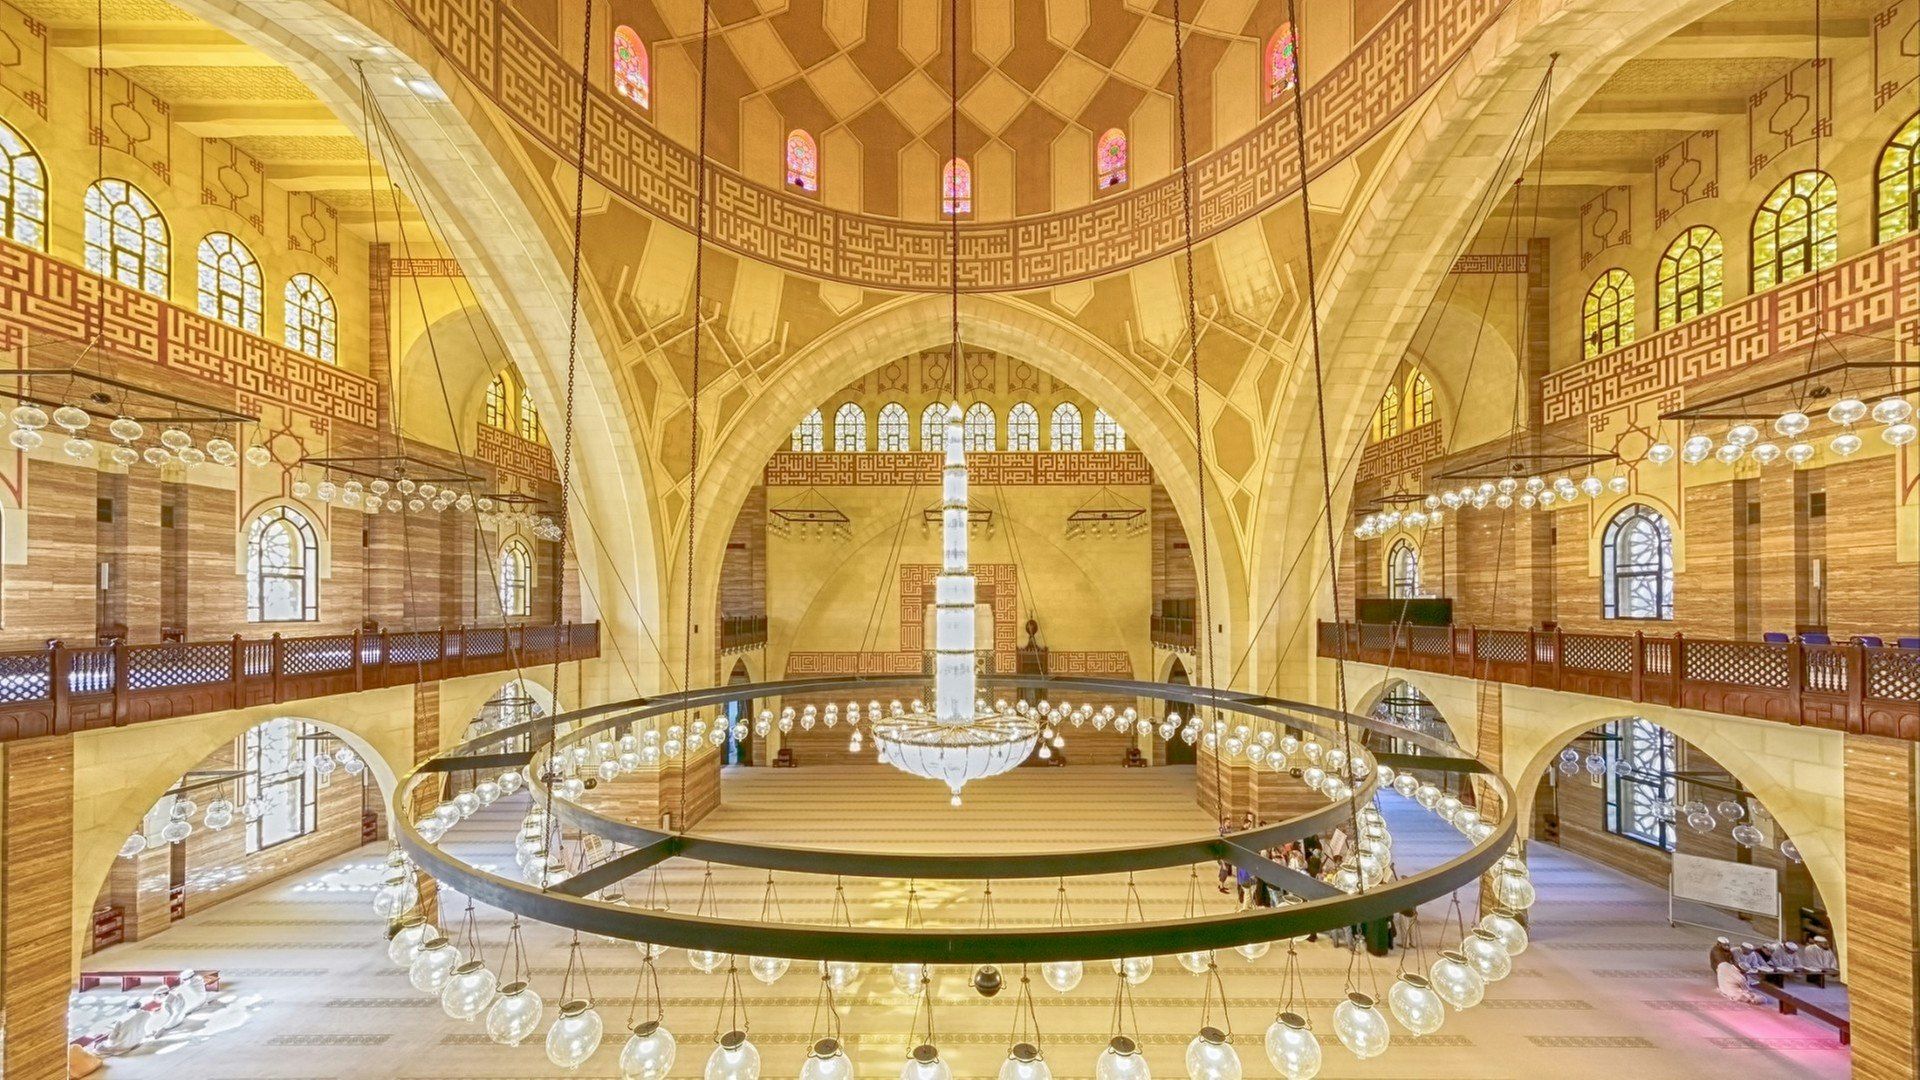 Interior view of the Al Fateh Grand Mosque featuring the Main Prayer Hall - view from the balcony